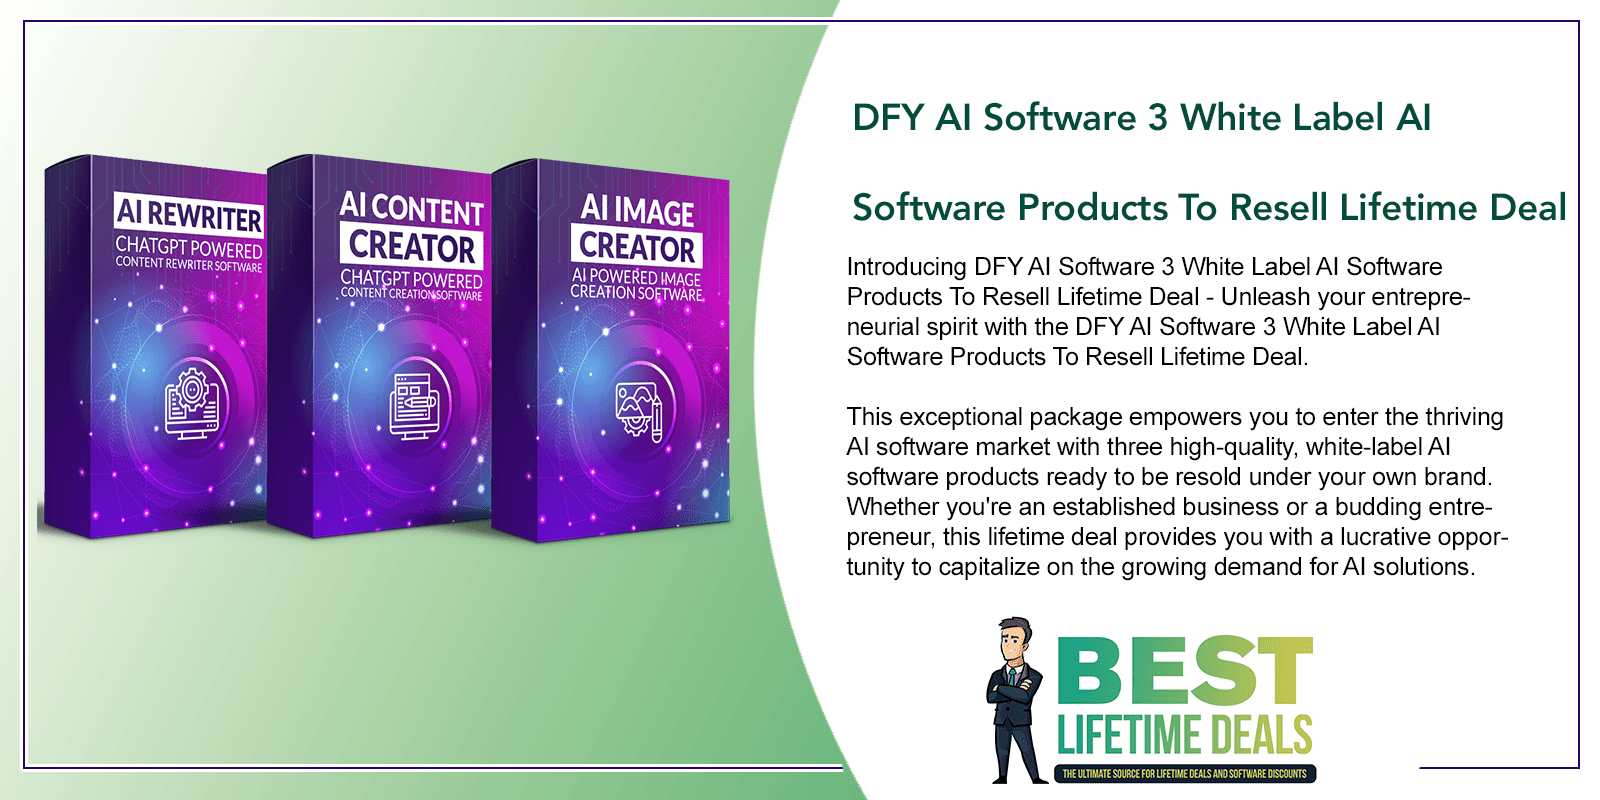 DFY AI Software 3 White Label AI Software Products To Resell Lifetime Deal Featured Image